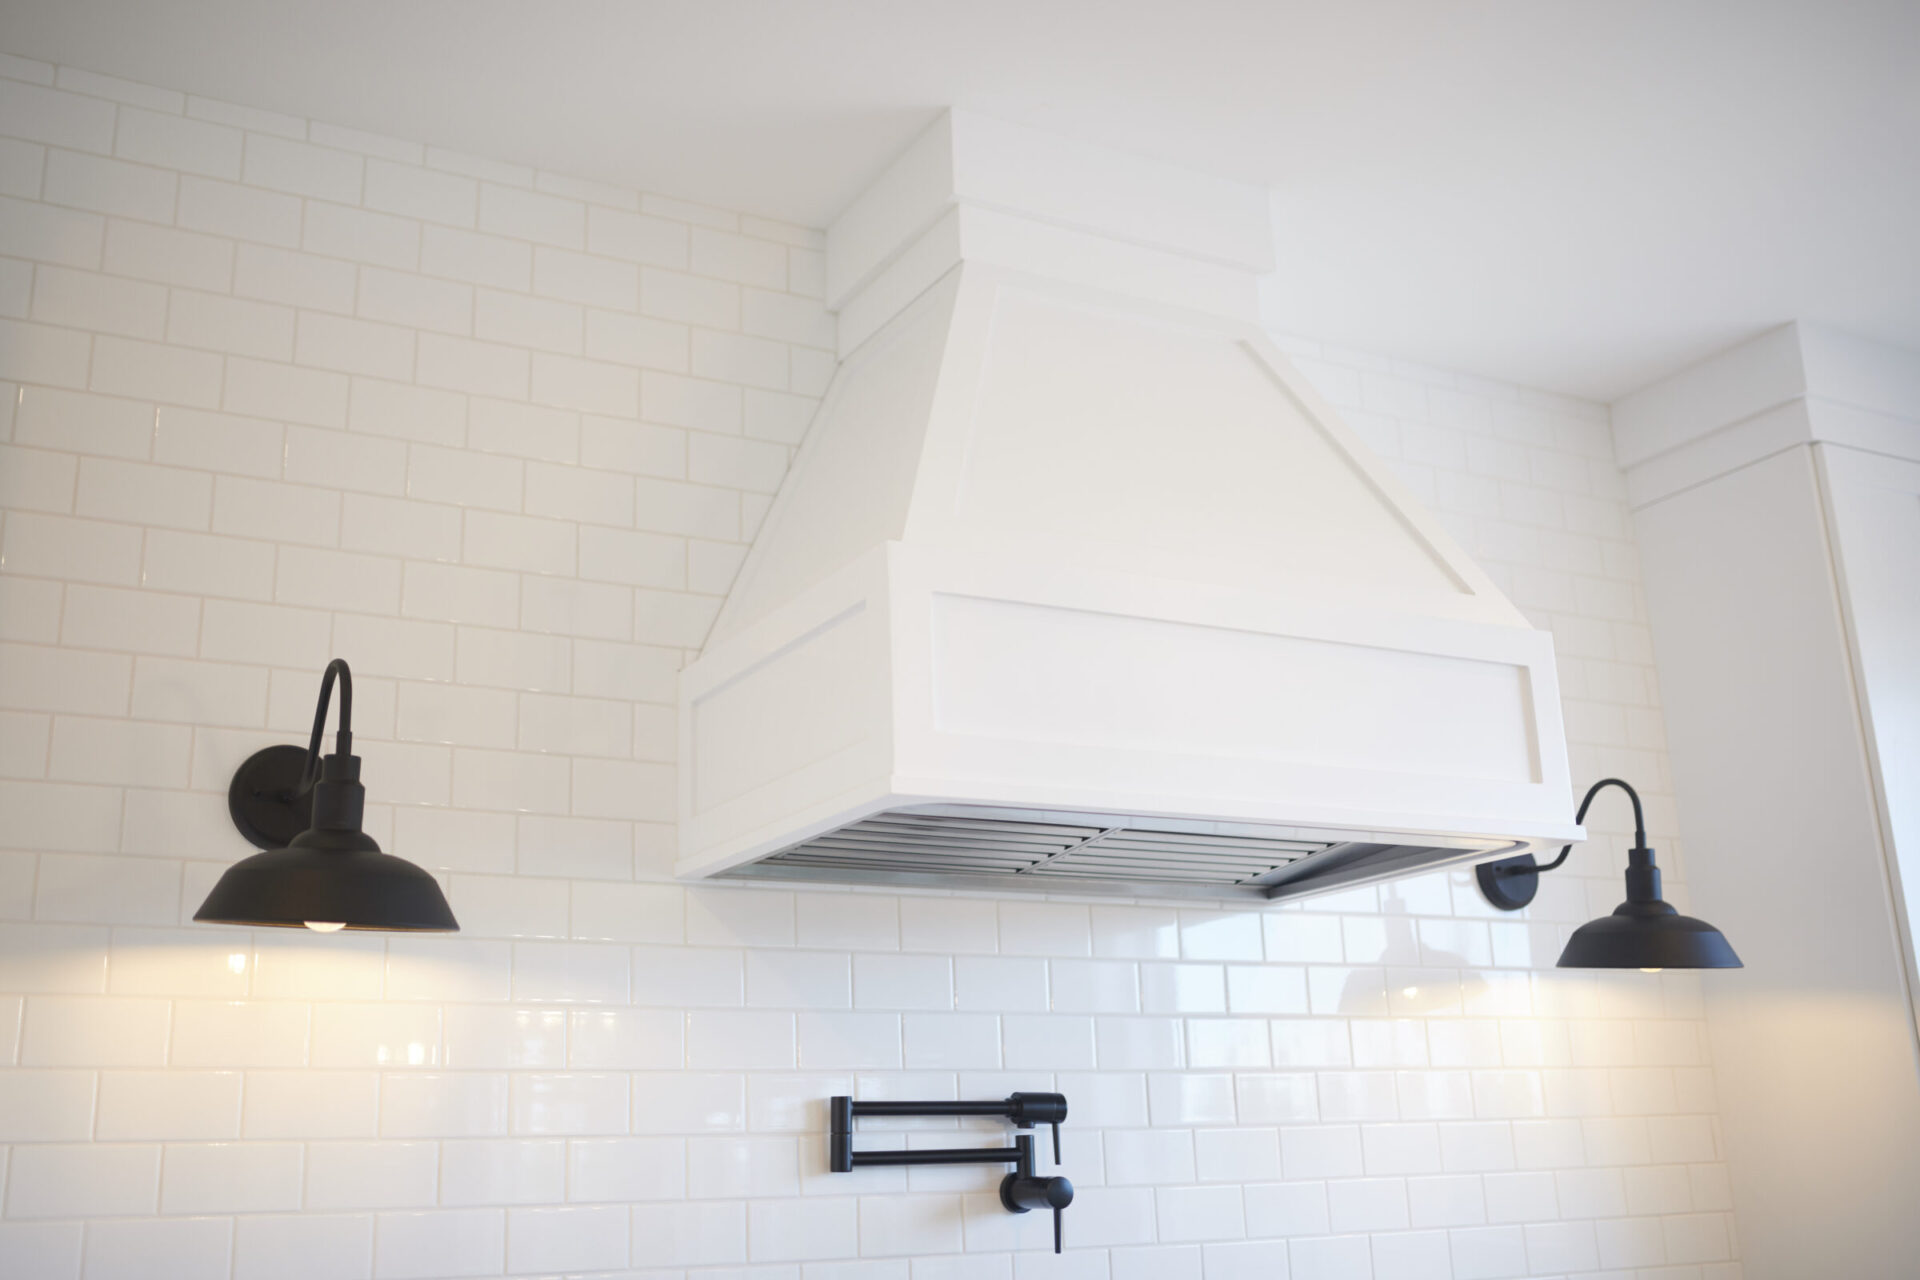 This is a modern kitchen backdrop featuring a large white range hood, subway tile wall, and two black industrial-style wall sconces.